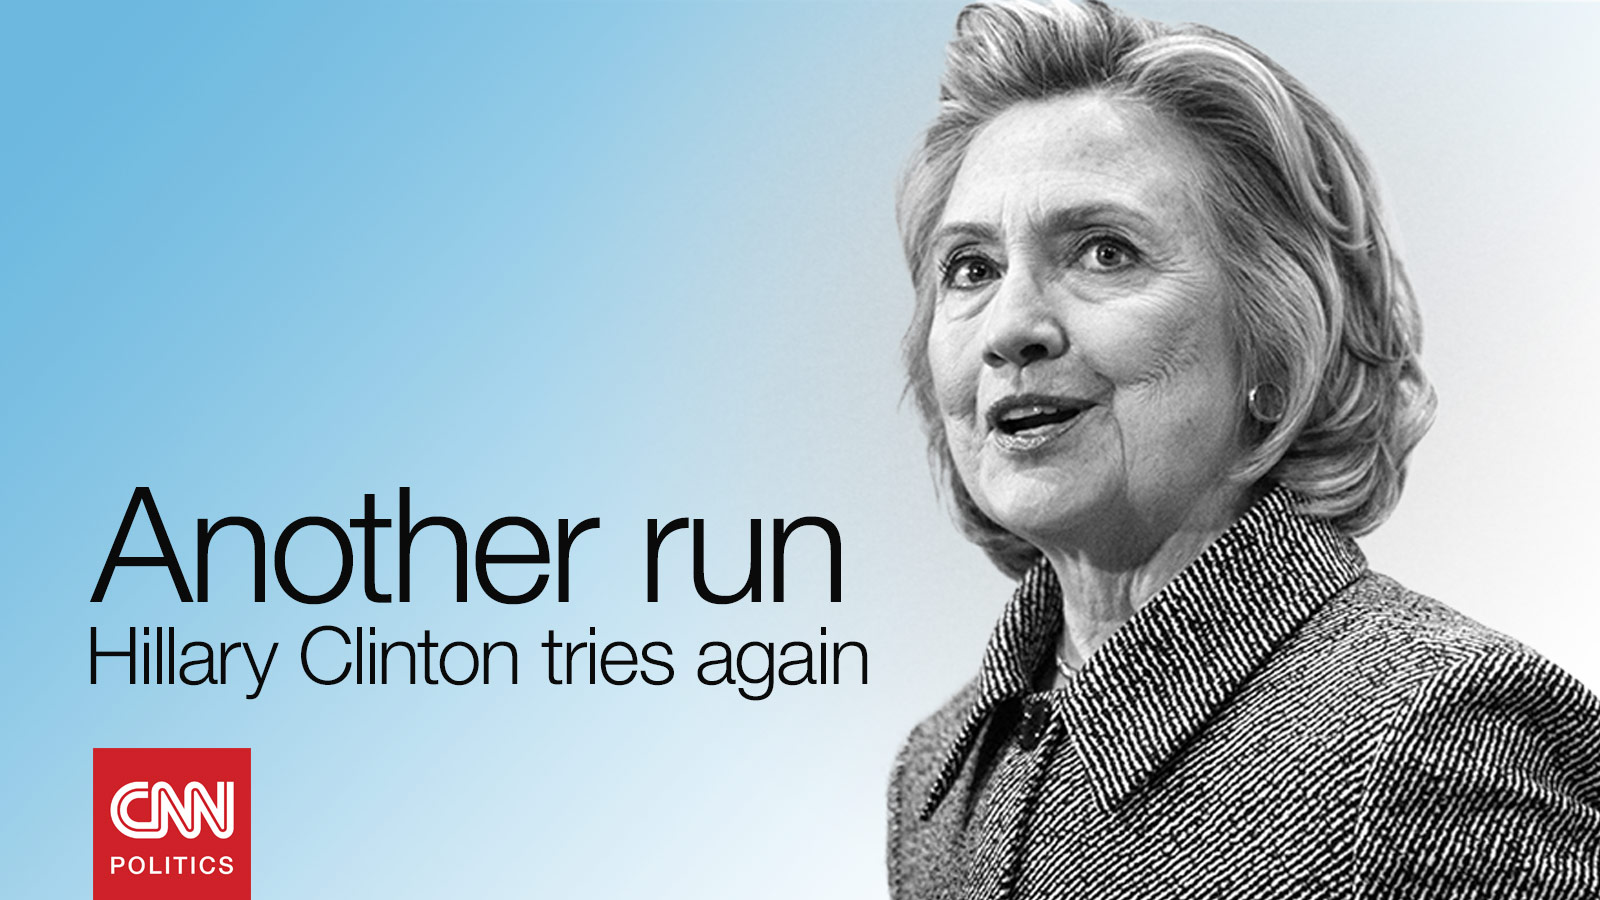 Election 2016: Hillary Clinton's journey to the campaign trail